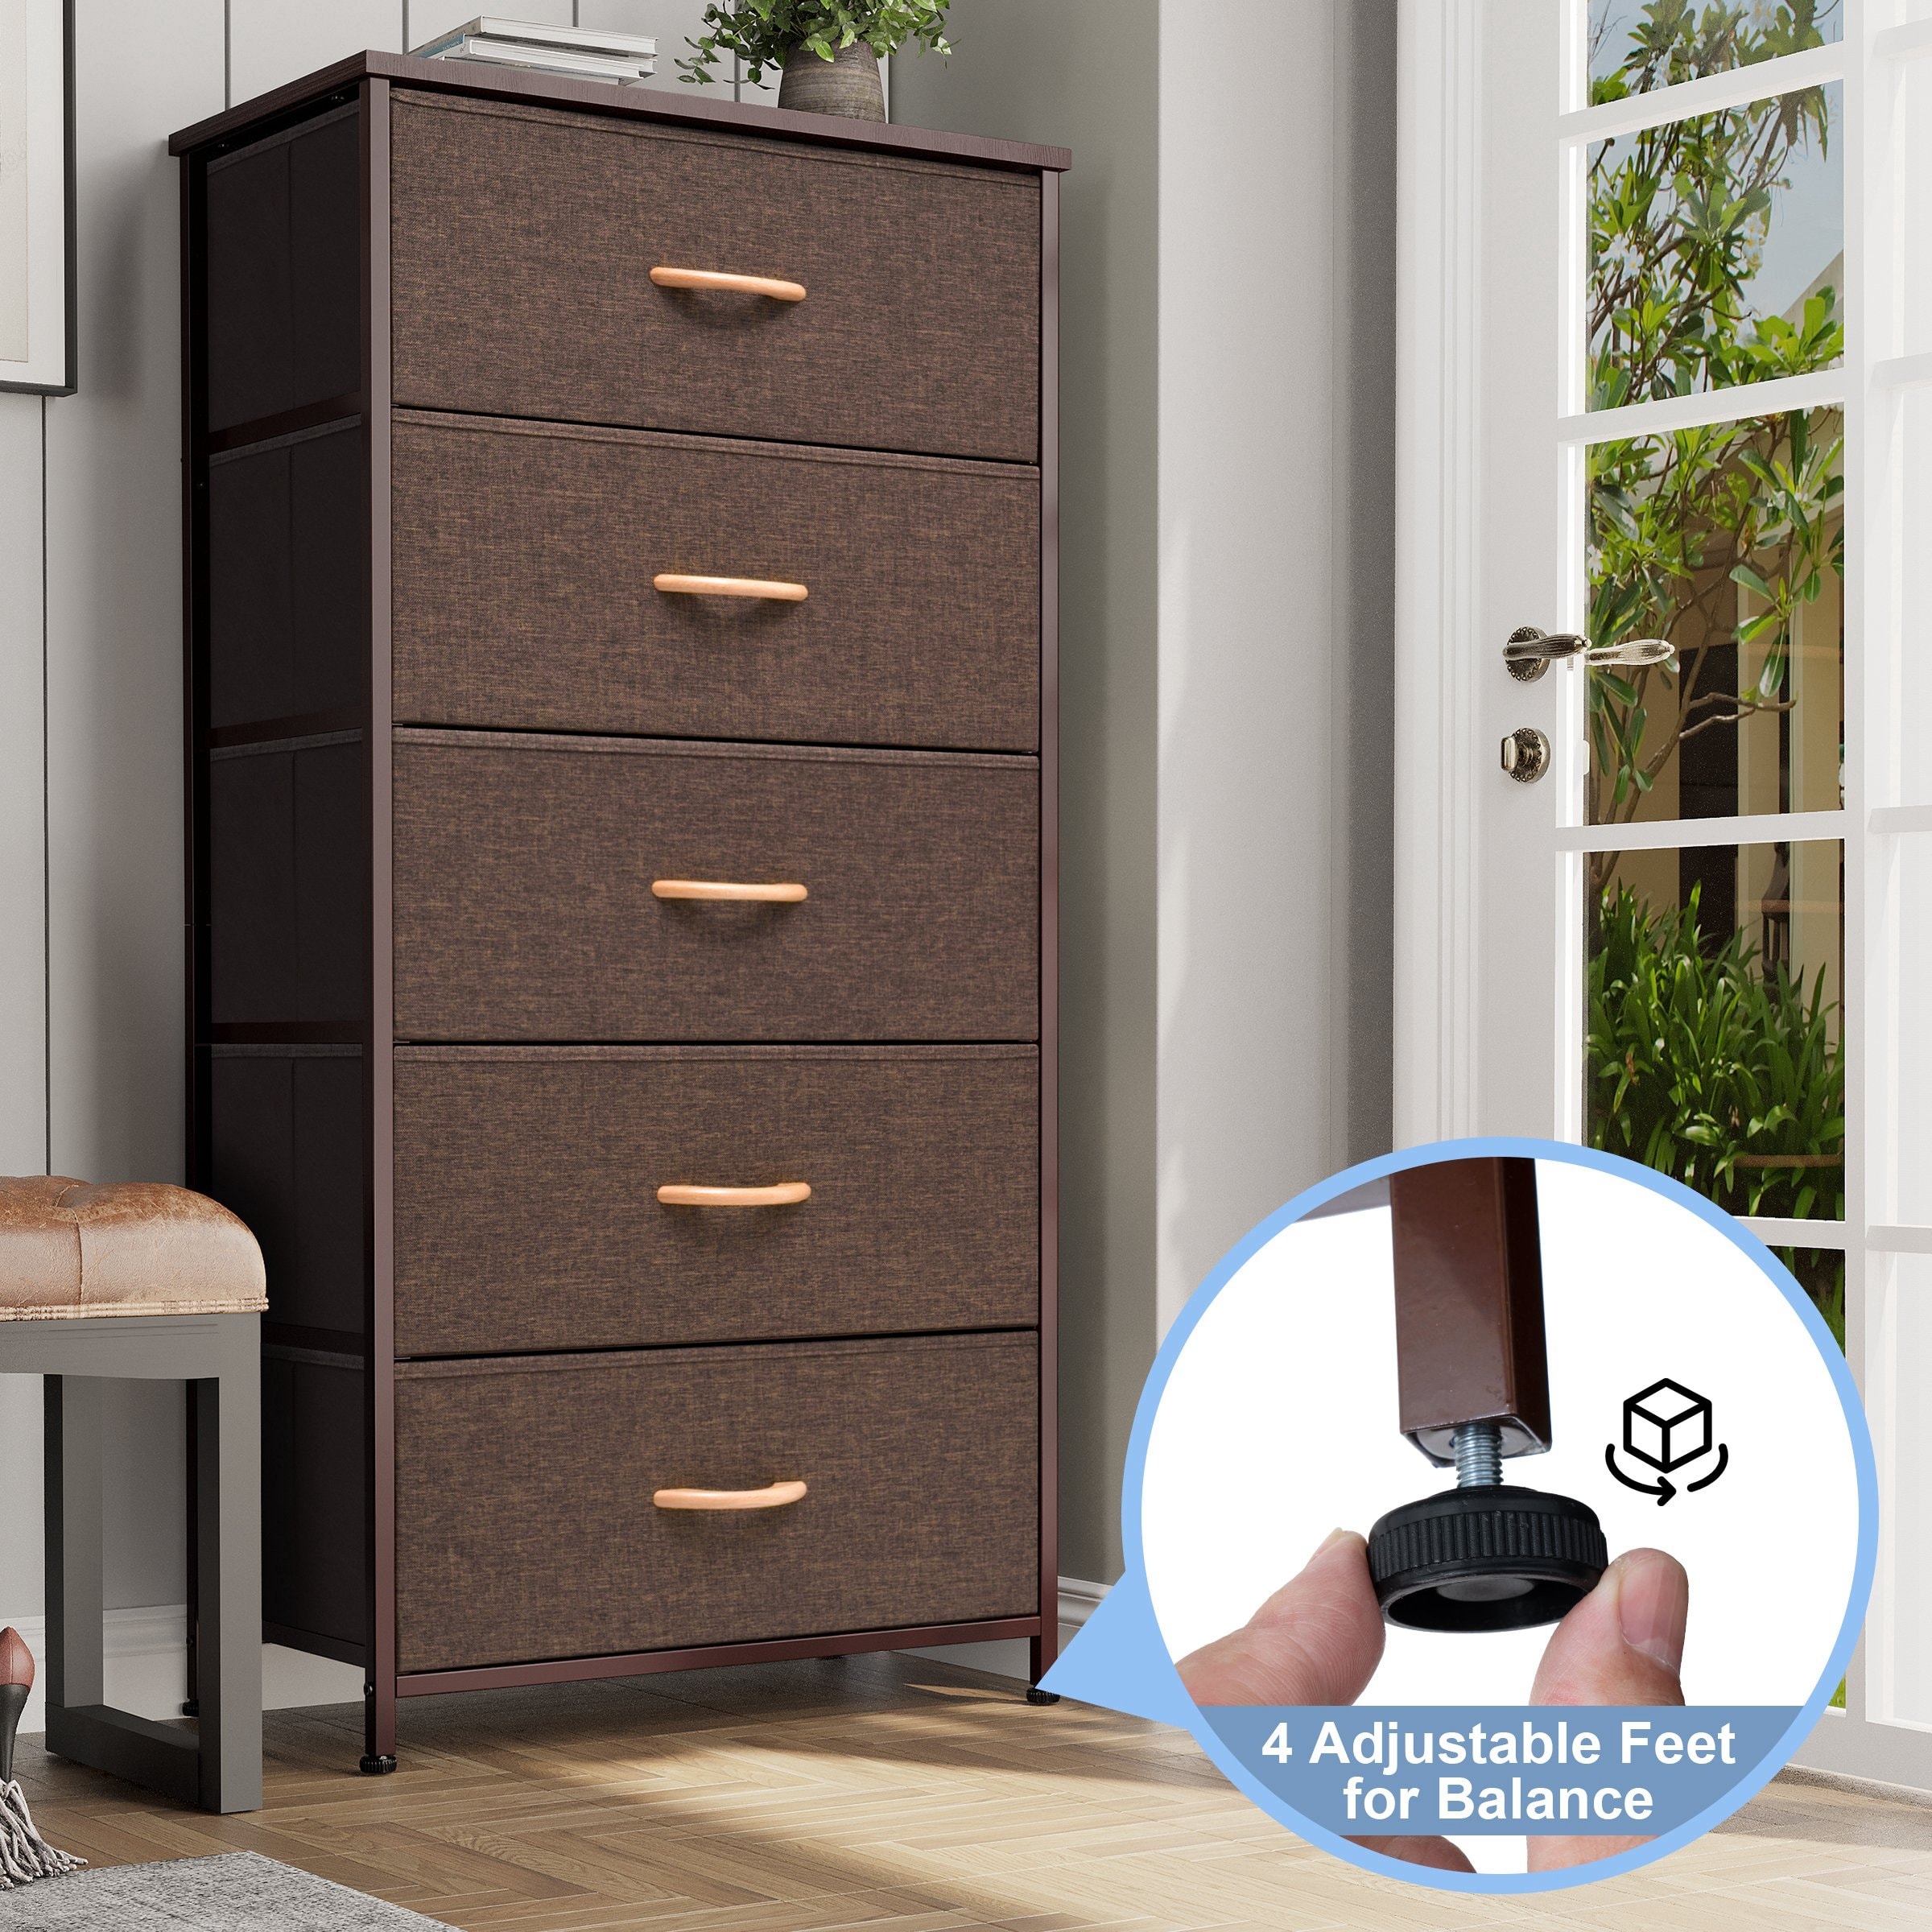 https://ak1.ostkcdn.com/images/products/is/images/direct/0feed1dcc8405748f528195f4dfb27f556ca3c5d/5-Drawers-Vertical-Dresser-Storage-Tower-Organizer-Unit-for-Bedroom.jpg